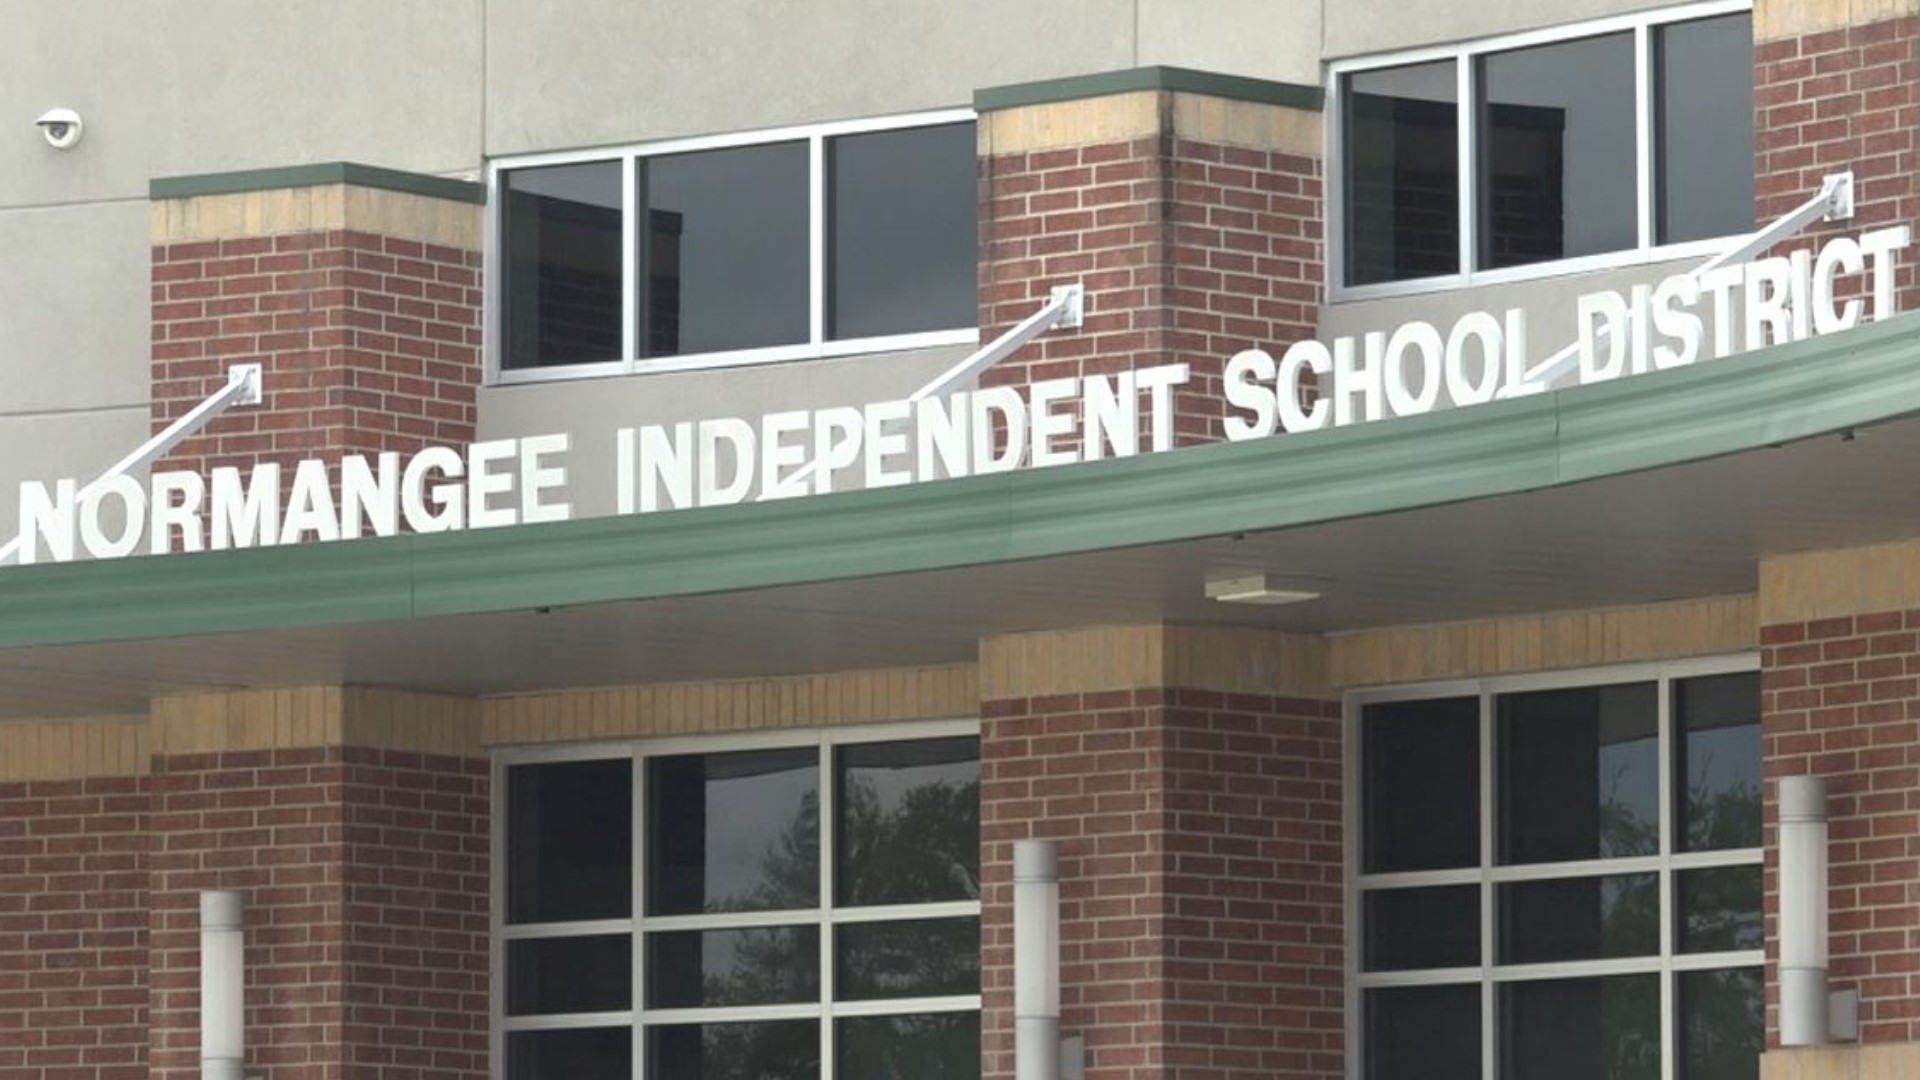 Mark Ruffin, the Superintendent for Normangee ISD, said that they had to use part of their budget to fund an increase in safety measures.